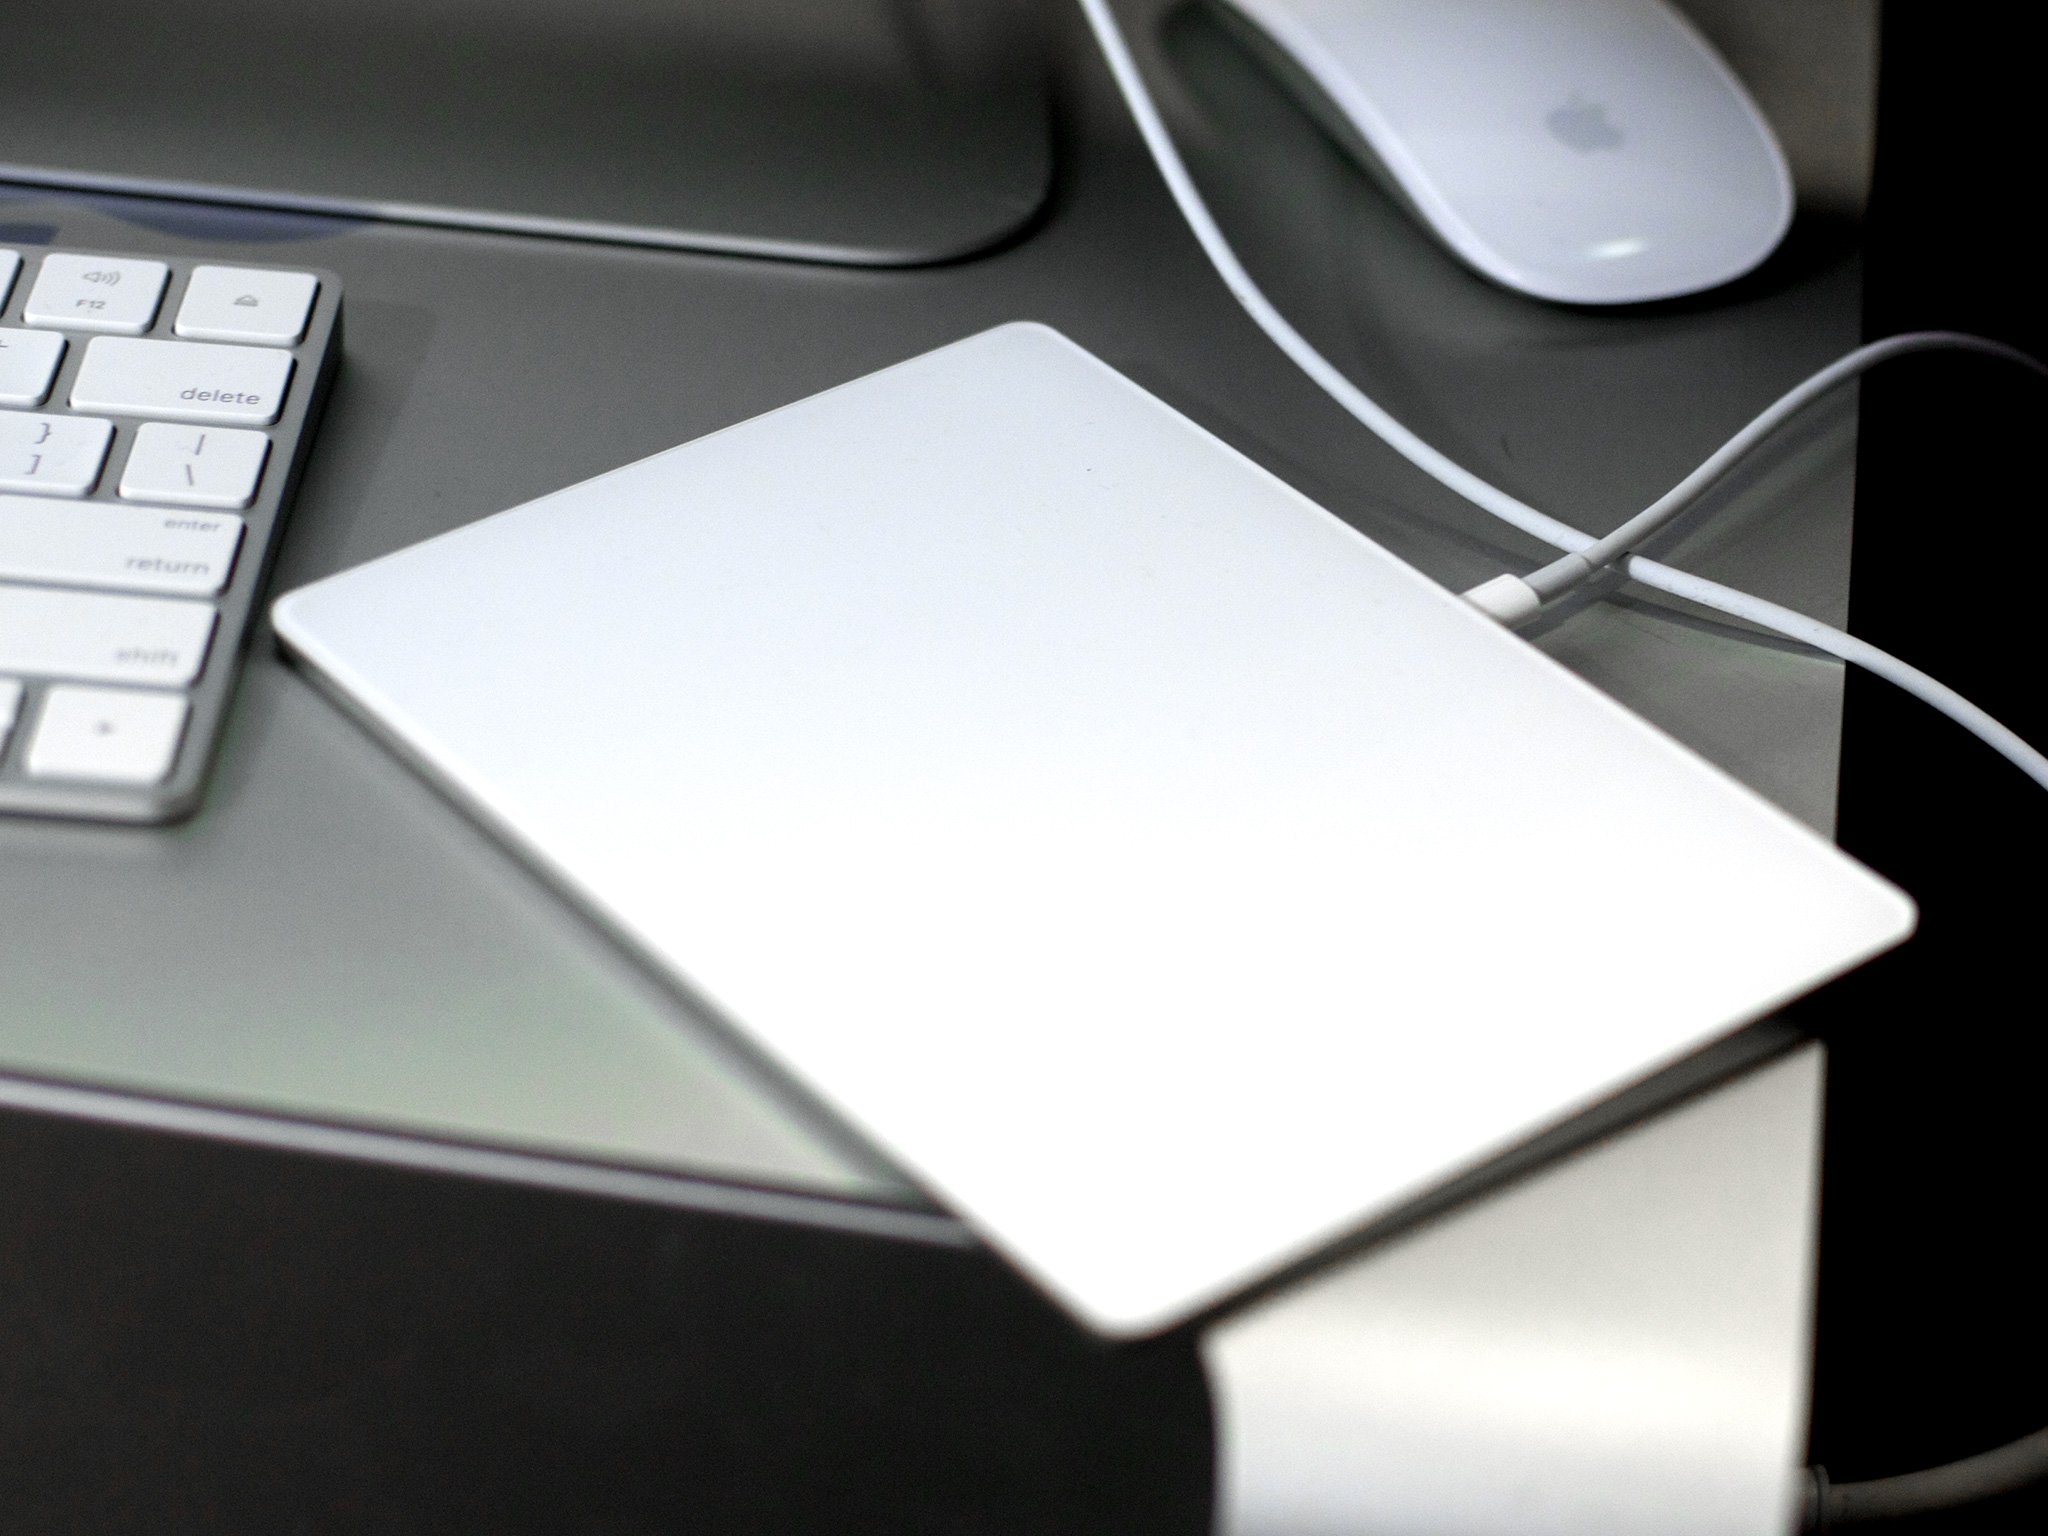 Magic Trackpad 2 review | iMore